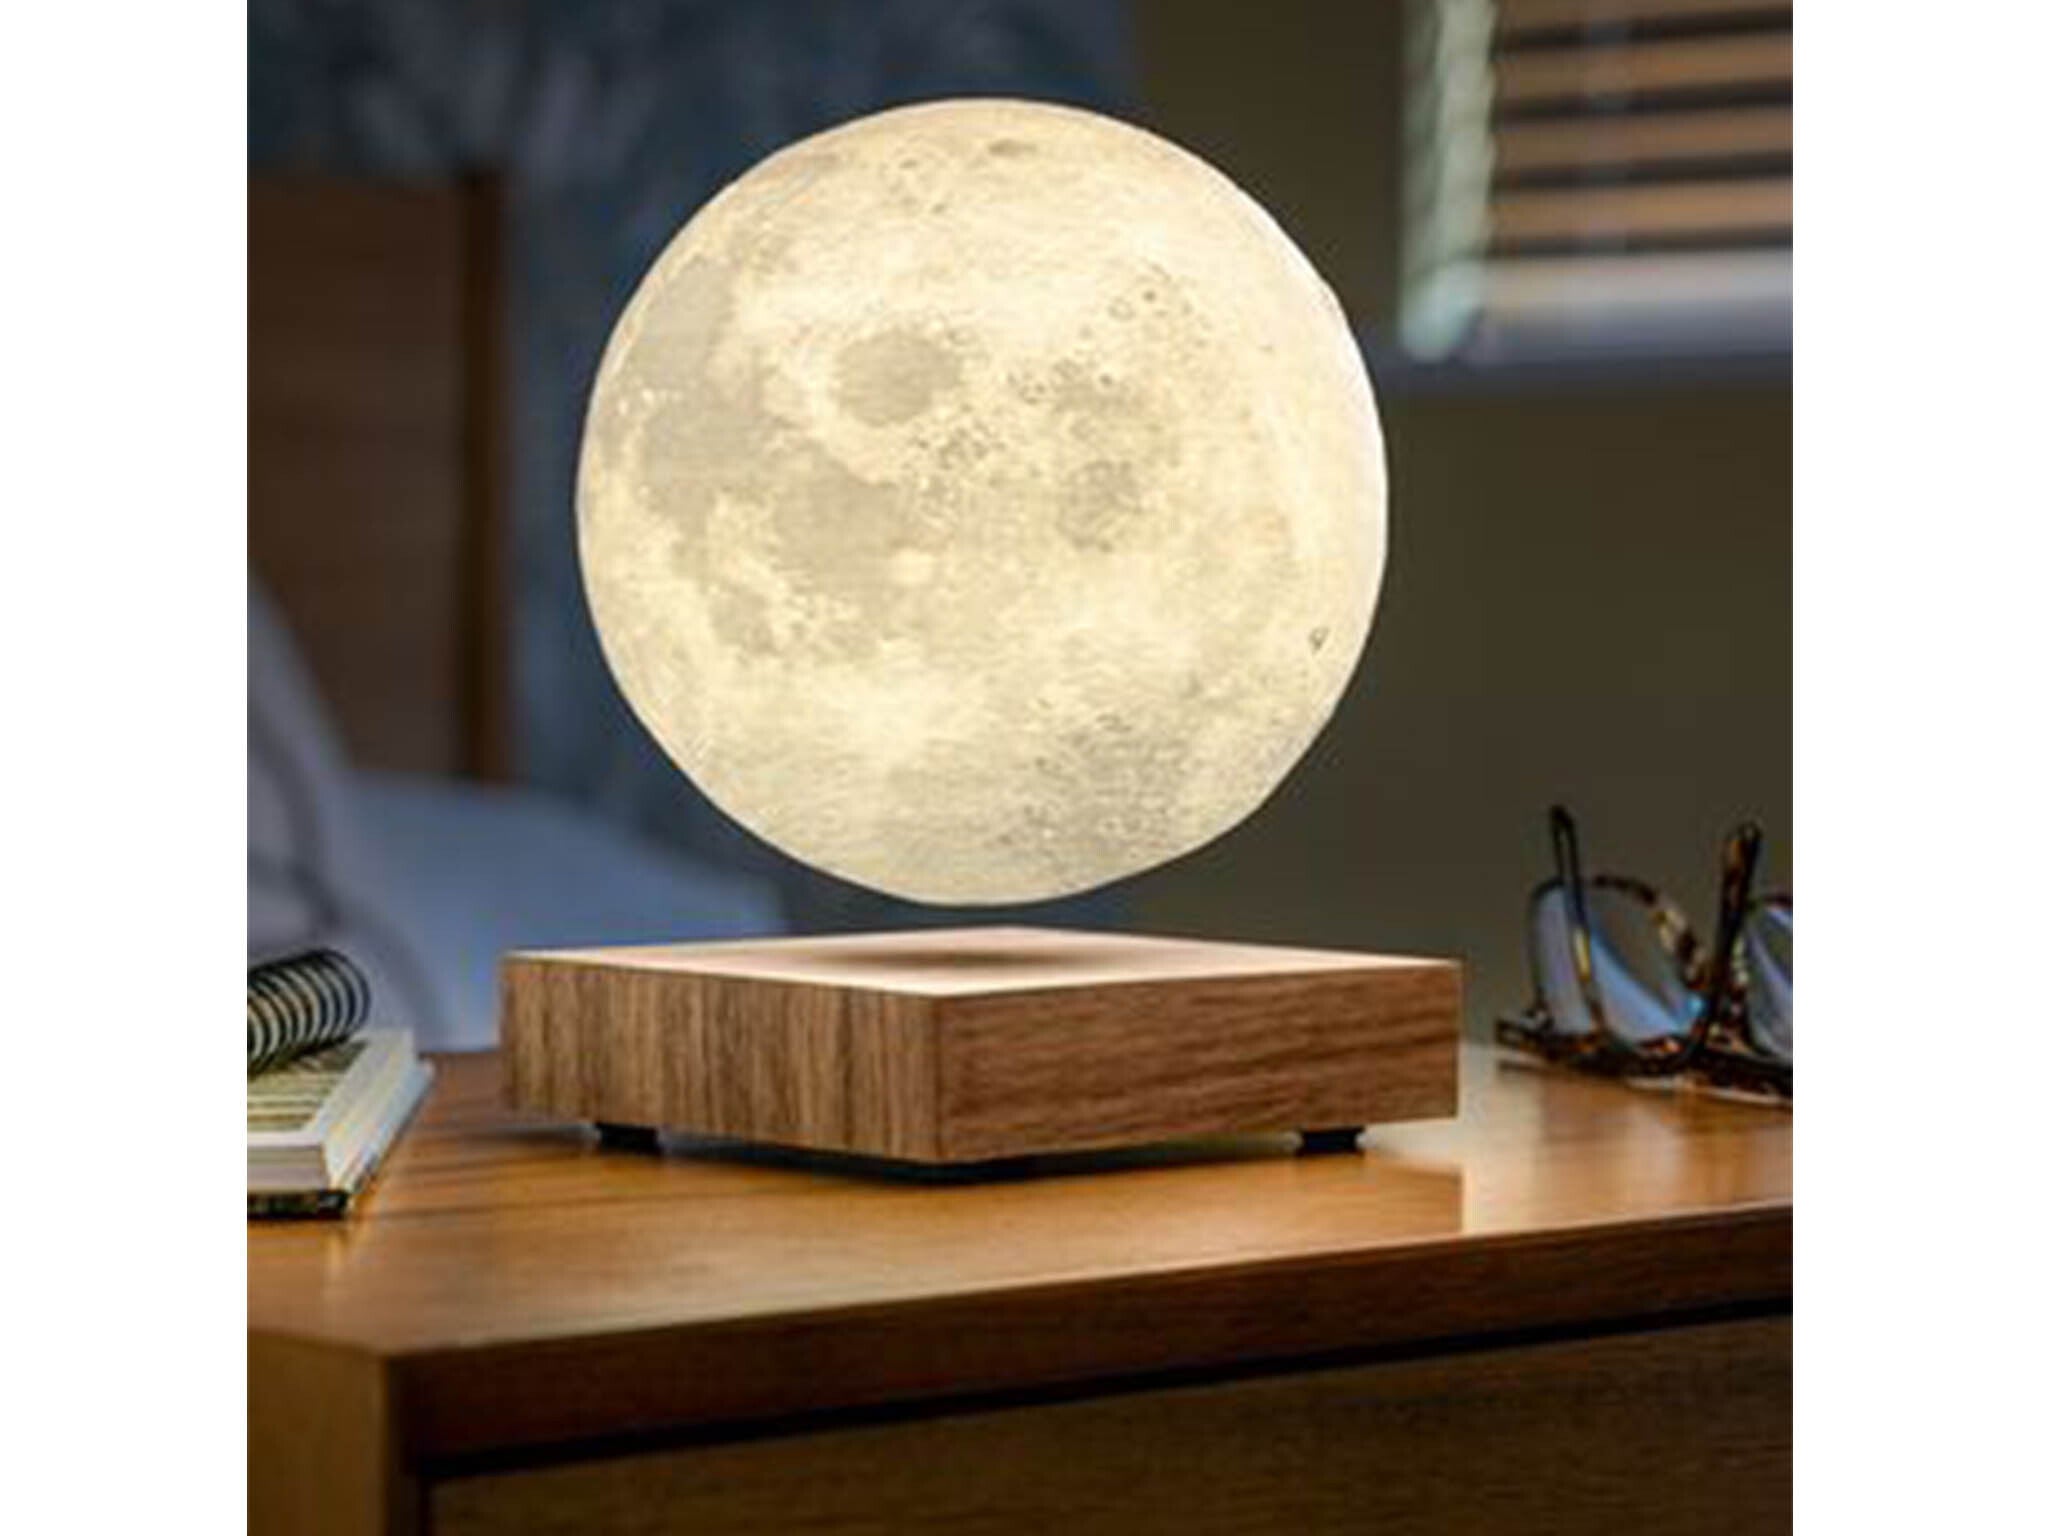 Floating moon lamps are TikTok's newest obsession